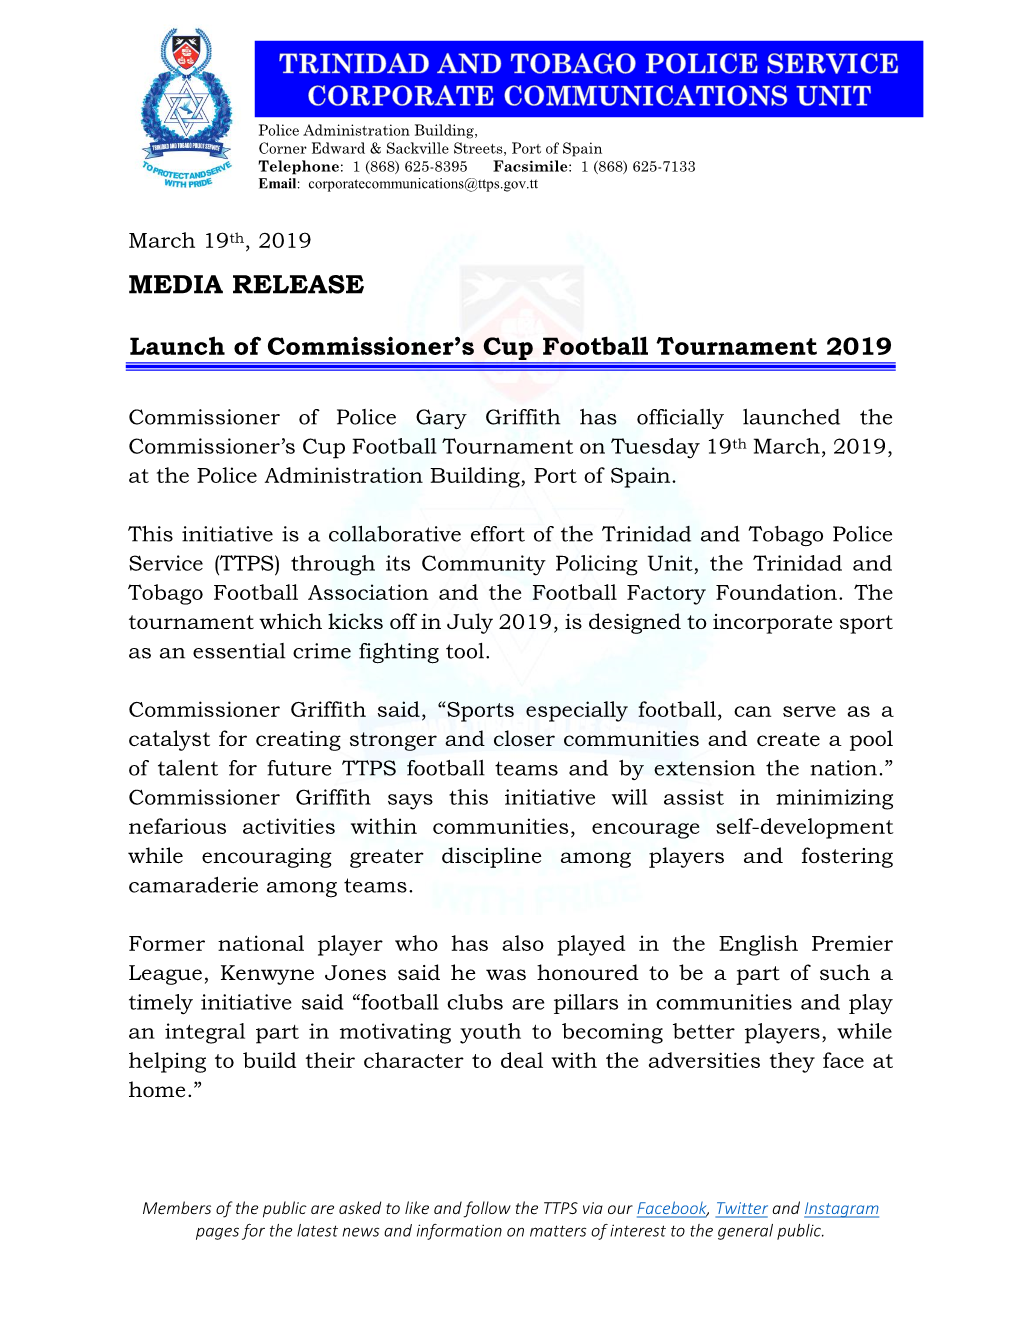 MEDIA RELEASE Launch of Commissioner's Cup Football